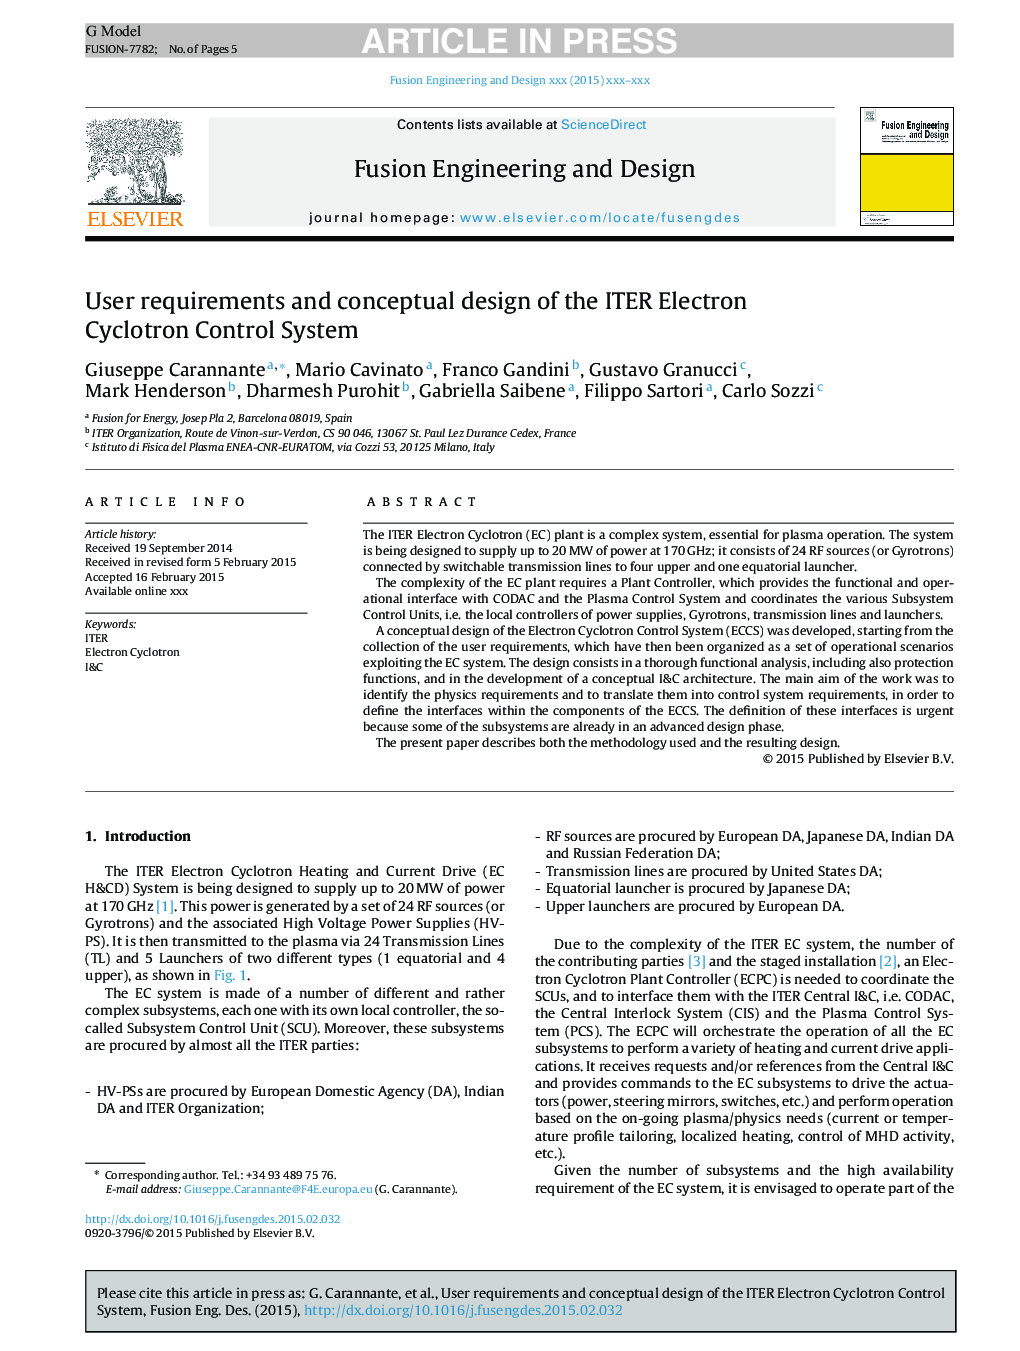 User requirements and conceptual design of the ITER Electron Cyclotron Control System